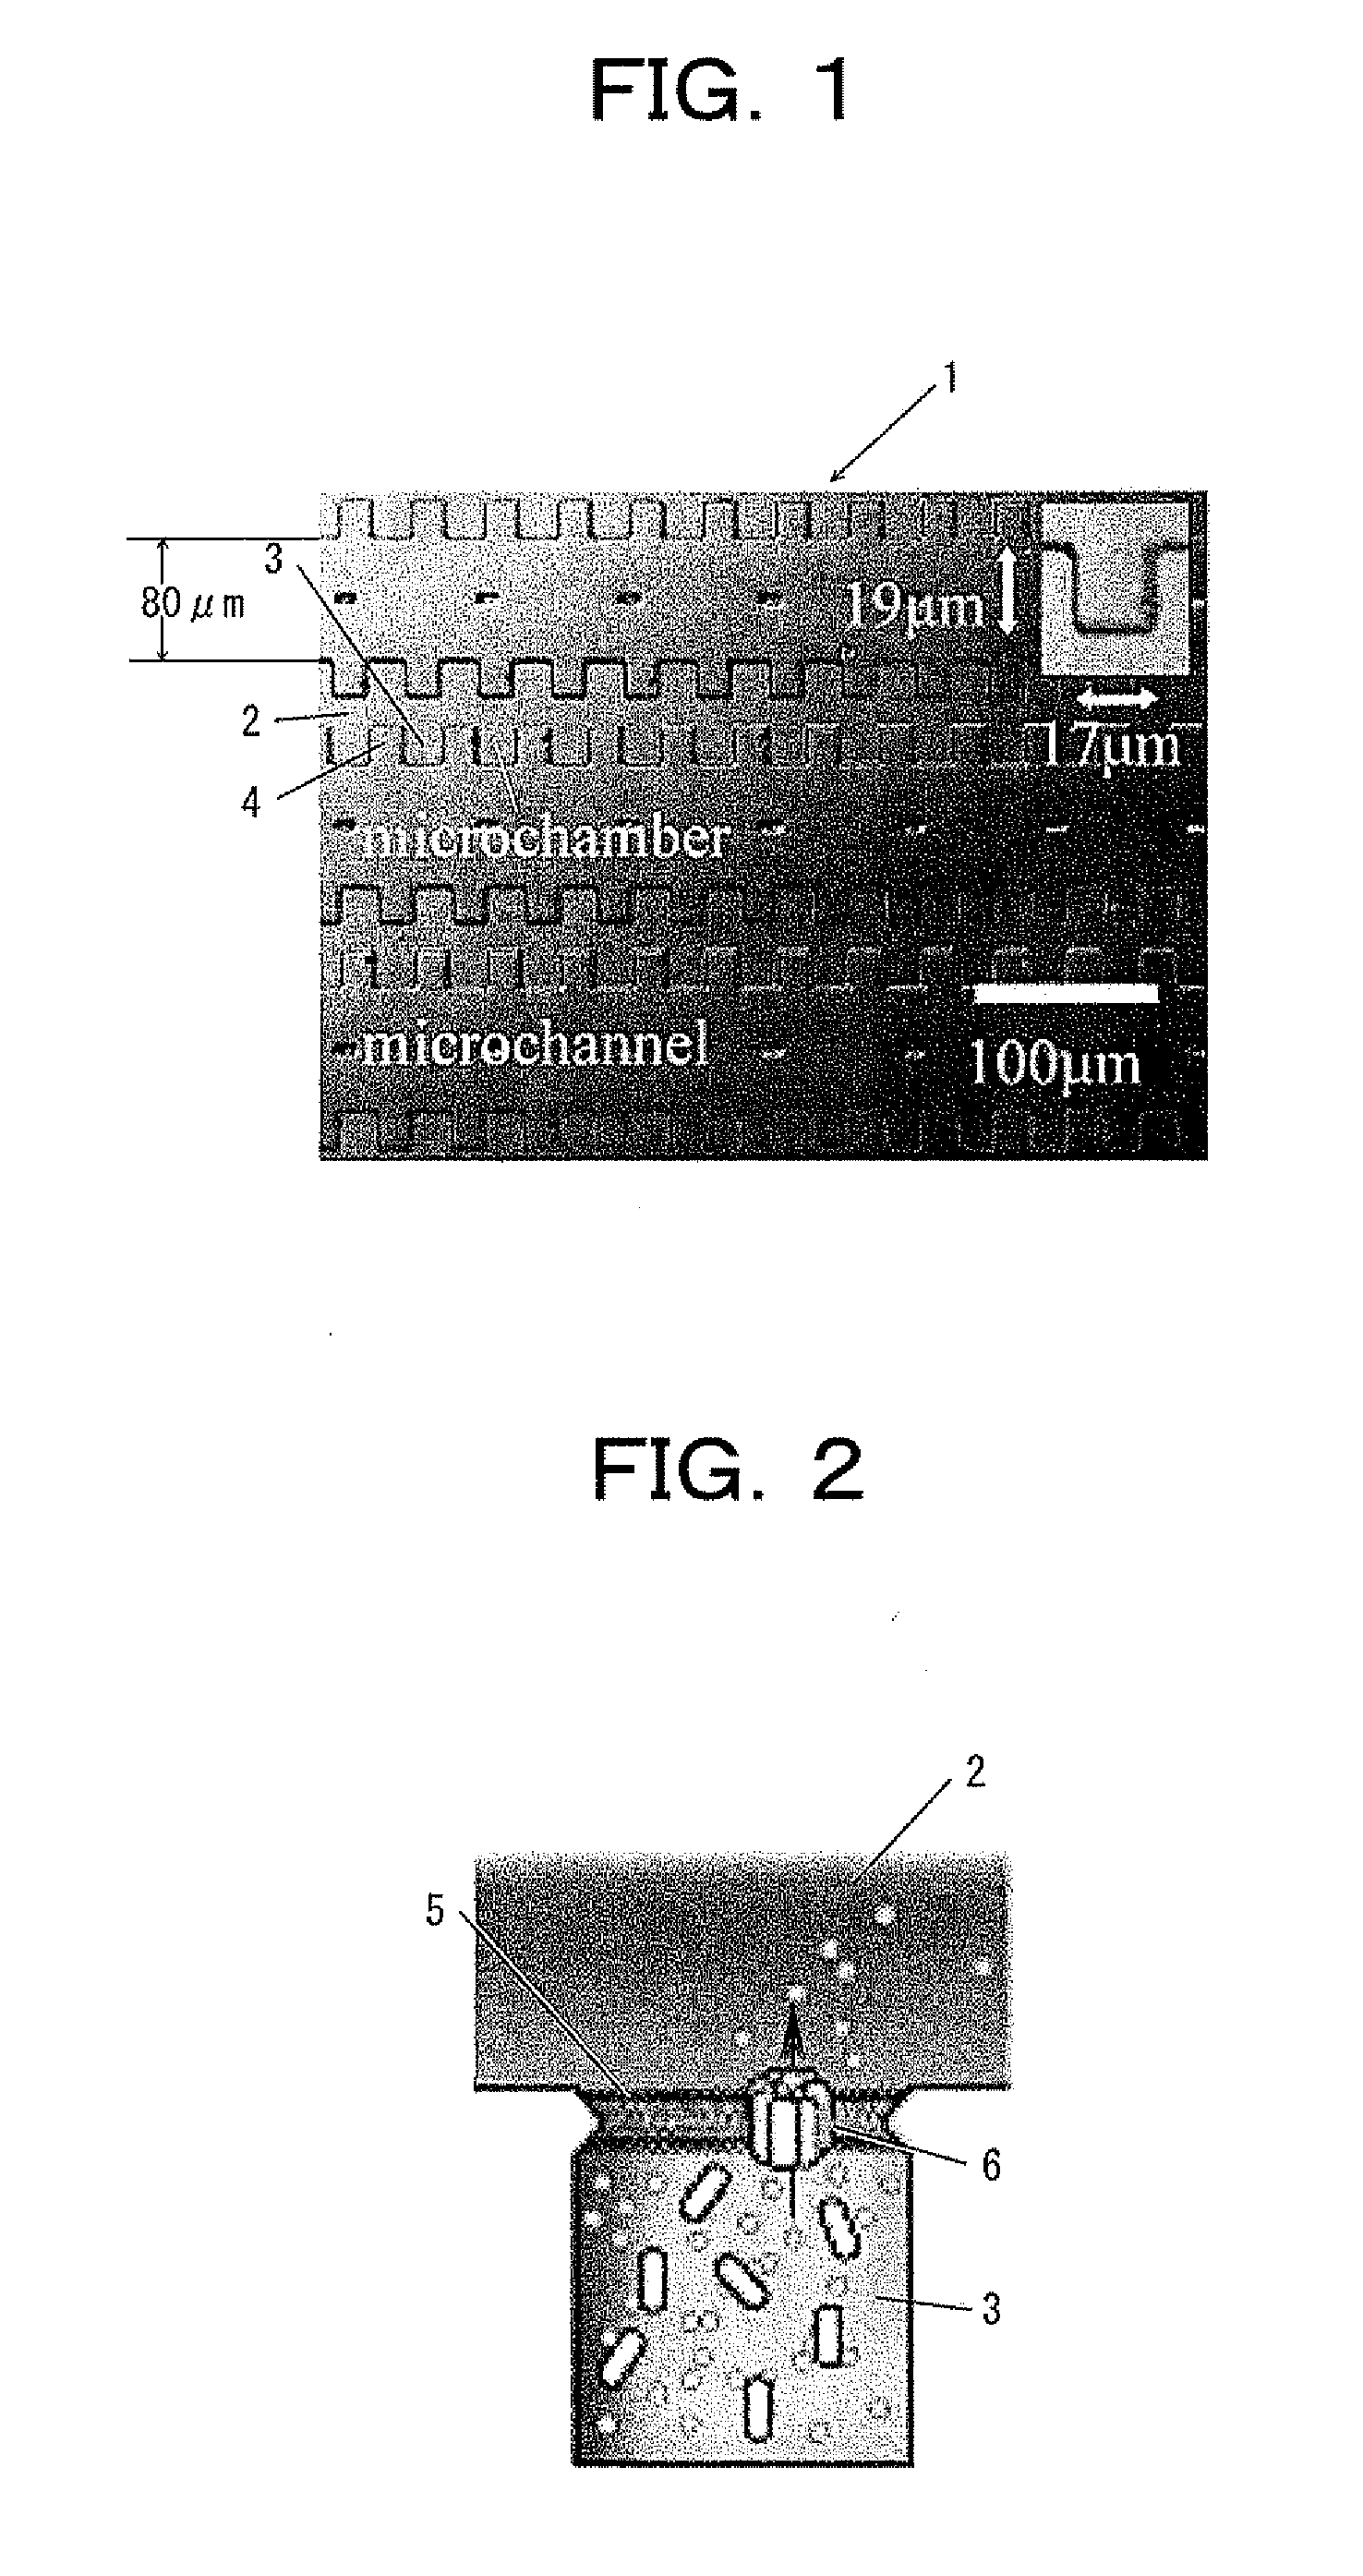 Planar lipid bilayer array formed by microfluidic technique and method of analysis using planar lipid bilayer